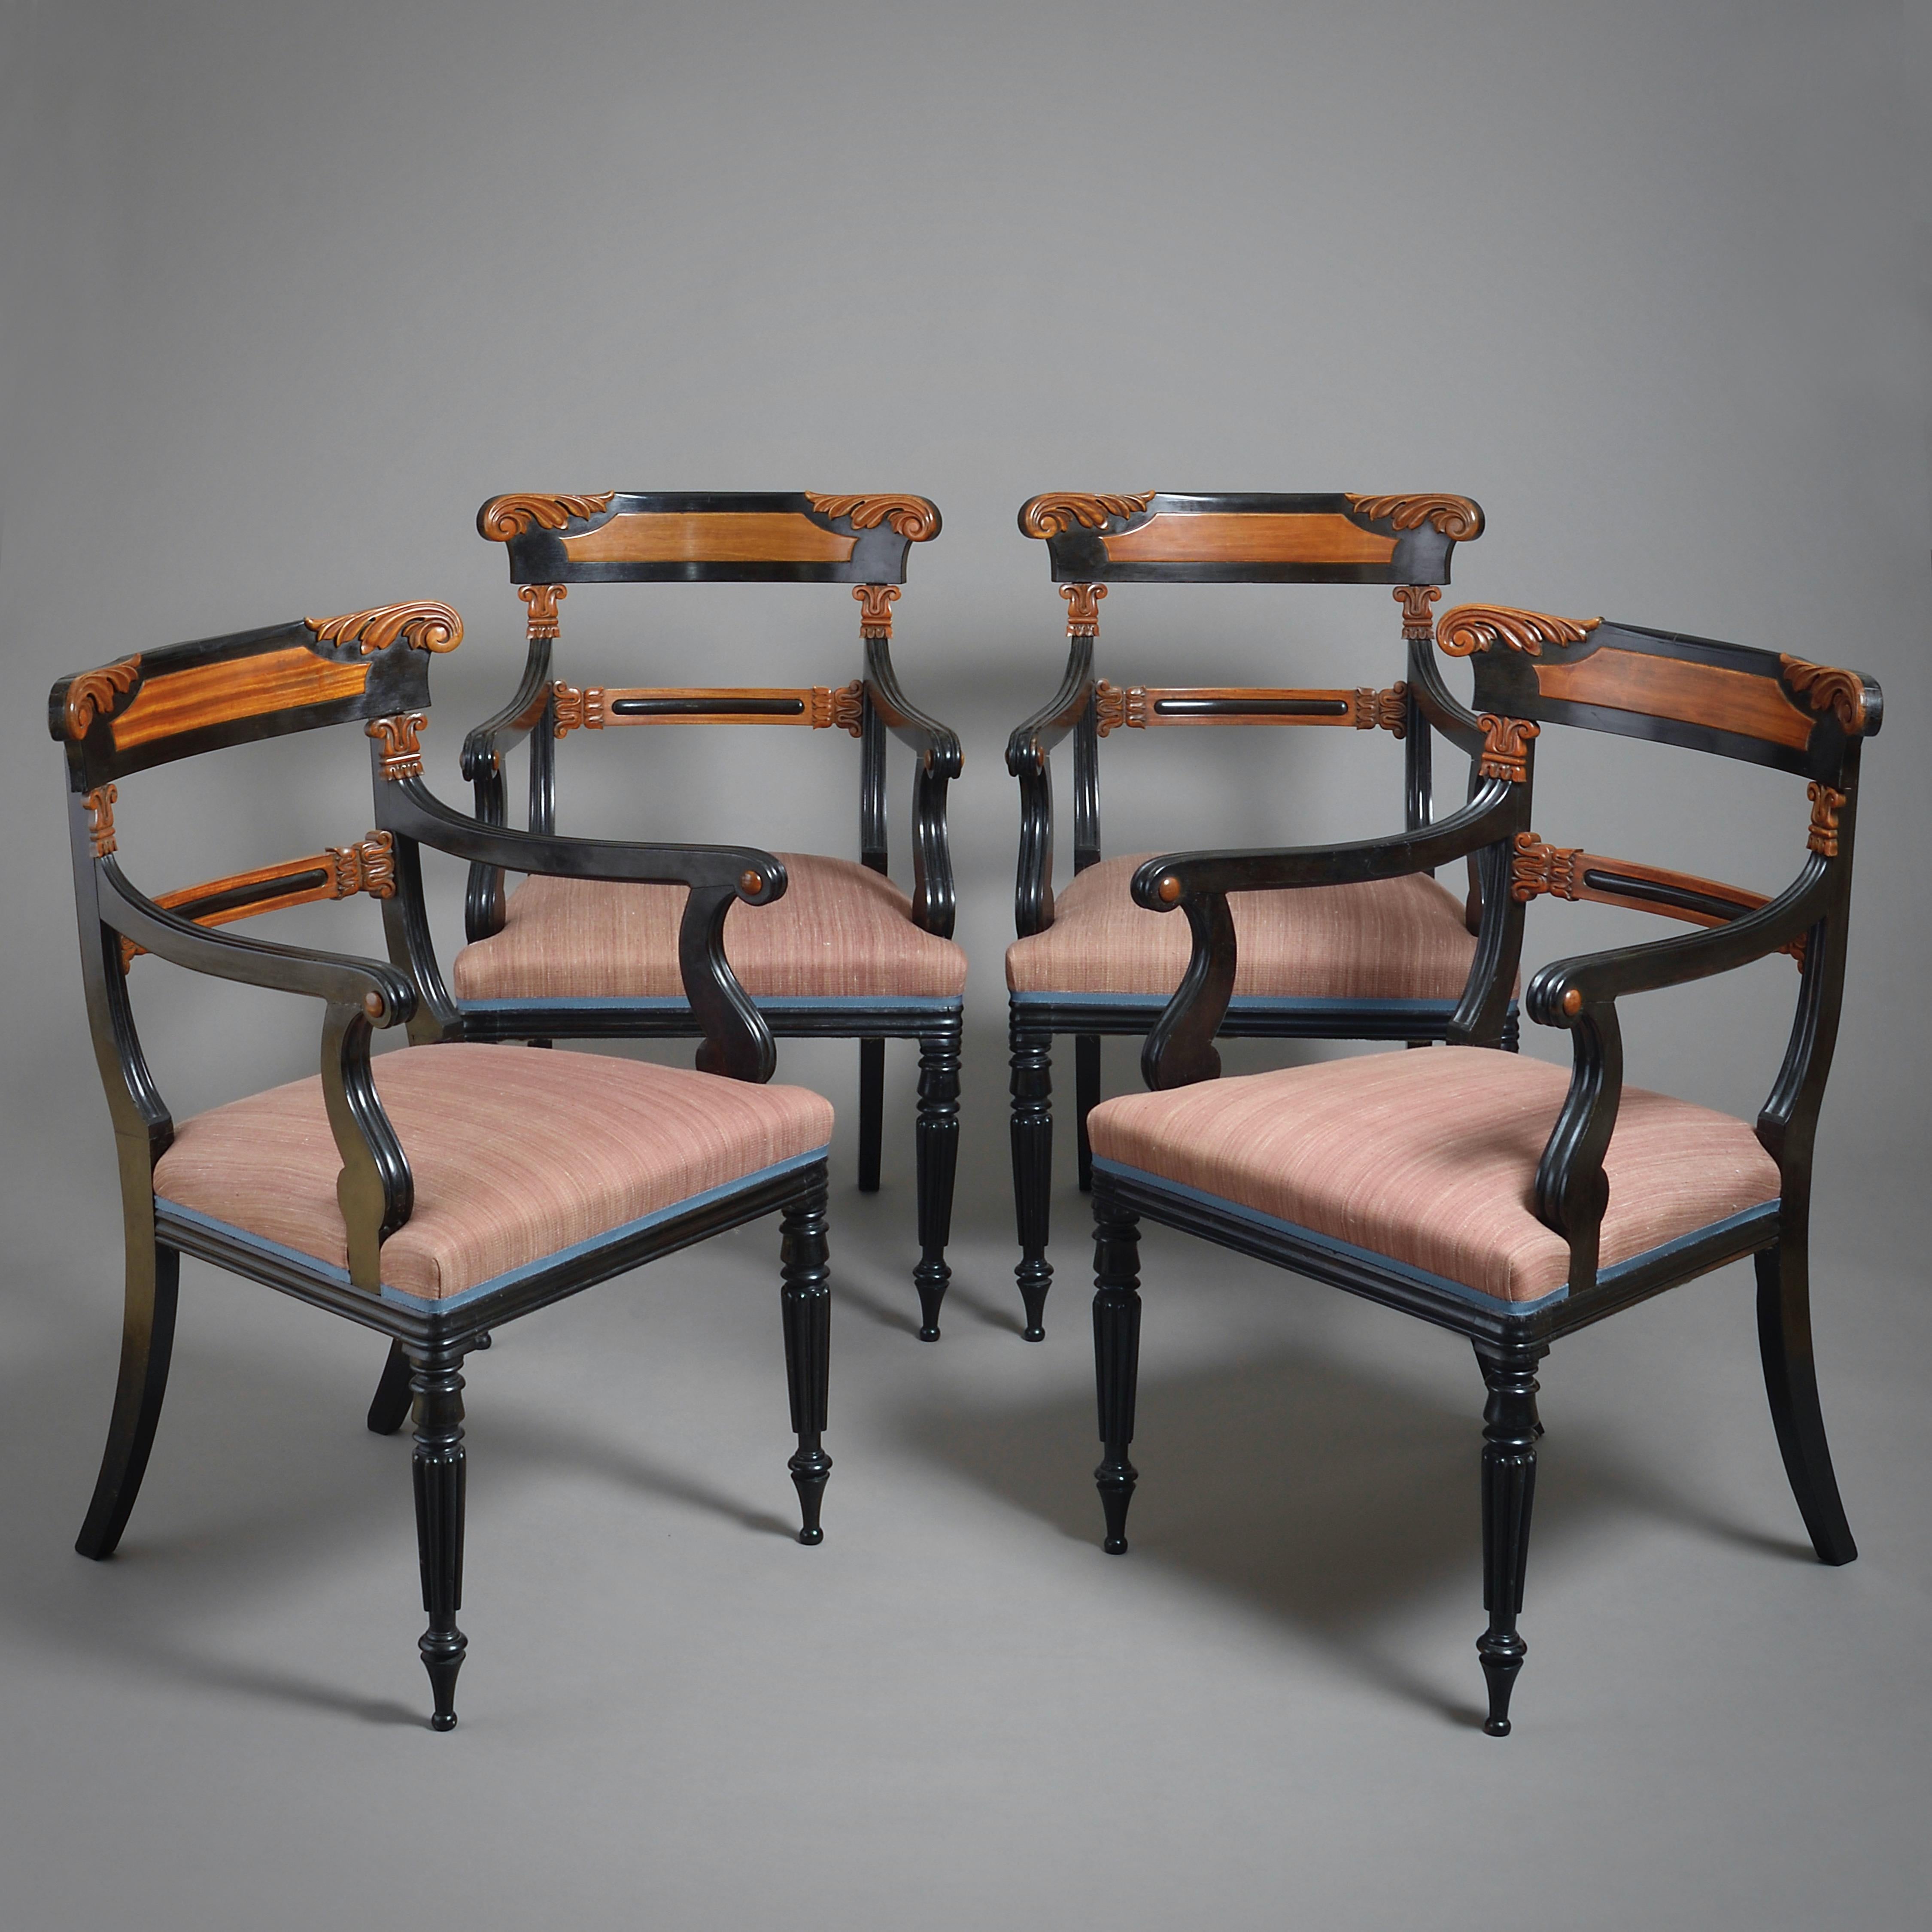 A FINE SET OF FOUR ANGLO-INDIAN SATINWOOD, EBONY AND EBONISED ARMCHAIRS, Circa 1830